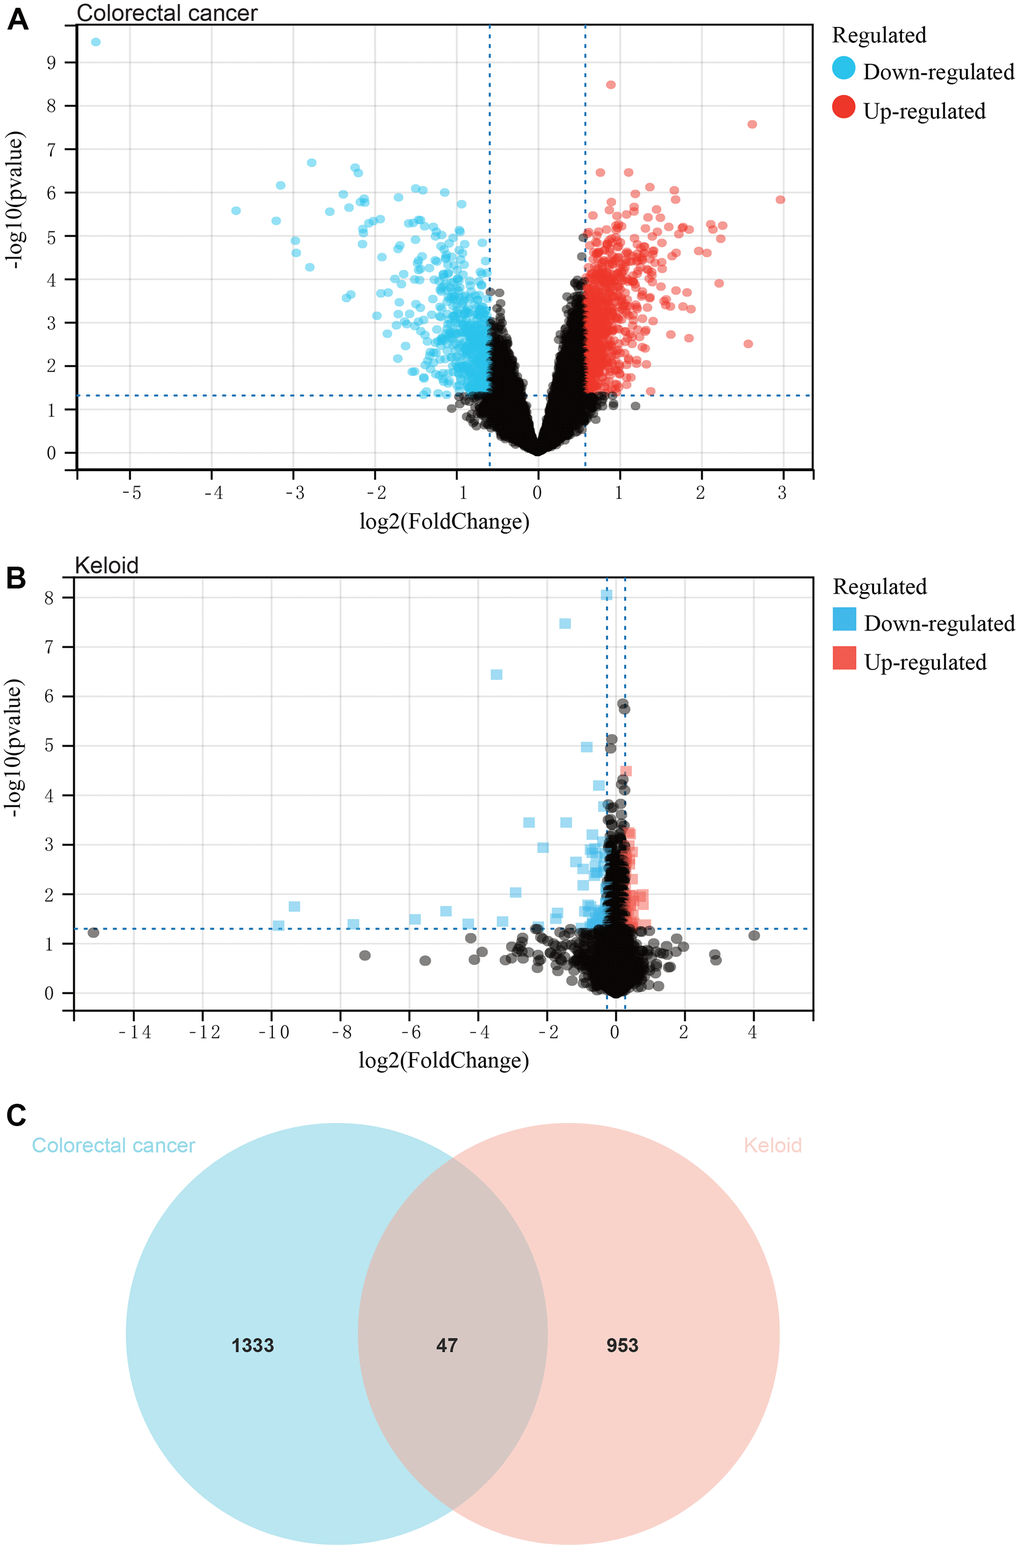 Analysis of differentially expressed genes. (A) The colorectal cancer dataset, and a total of 1380 DEGs. (B) The keloid dataset, and a total of 1000 DEGs. (C) The intersection of differential genes of colorectal cancer and keloid was used to obtain the Venn diagram.